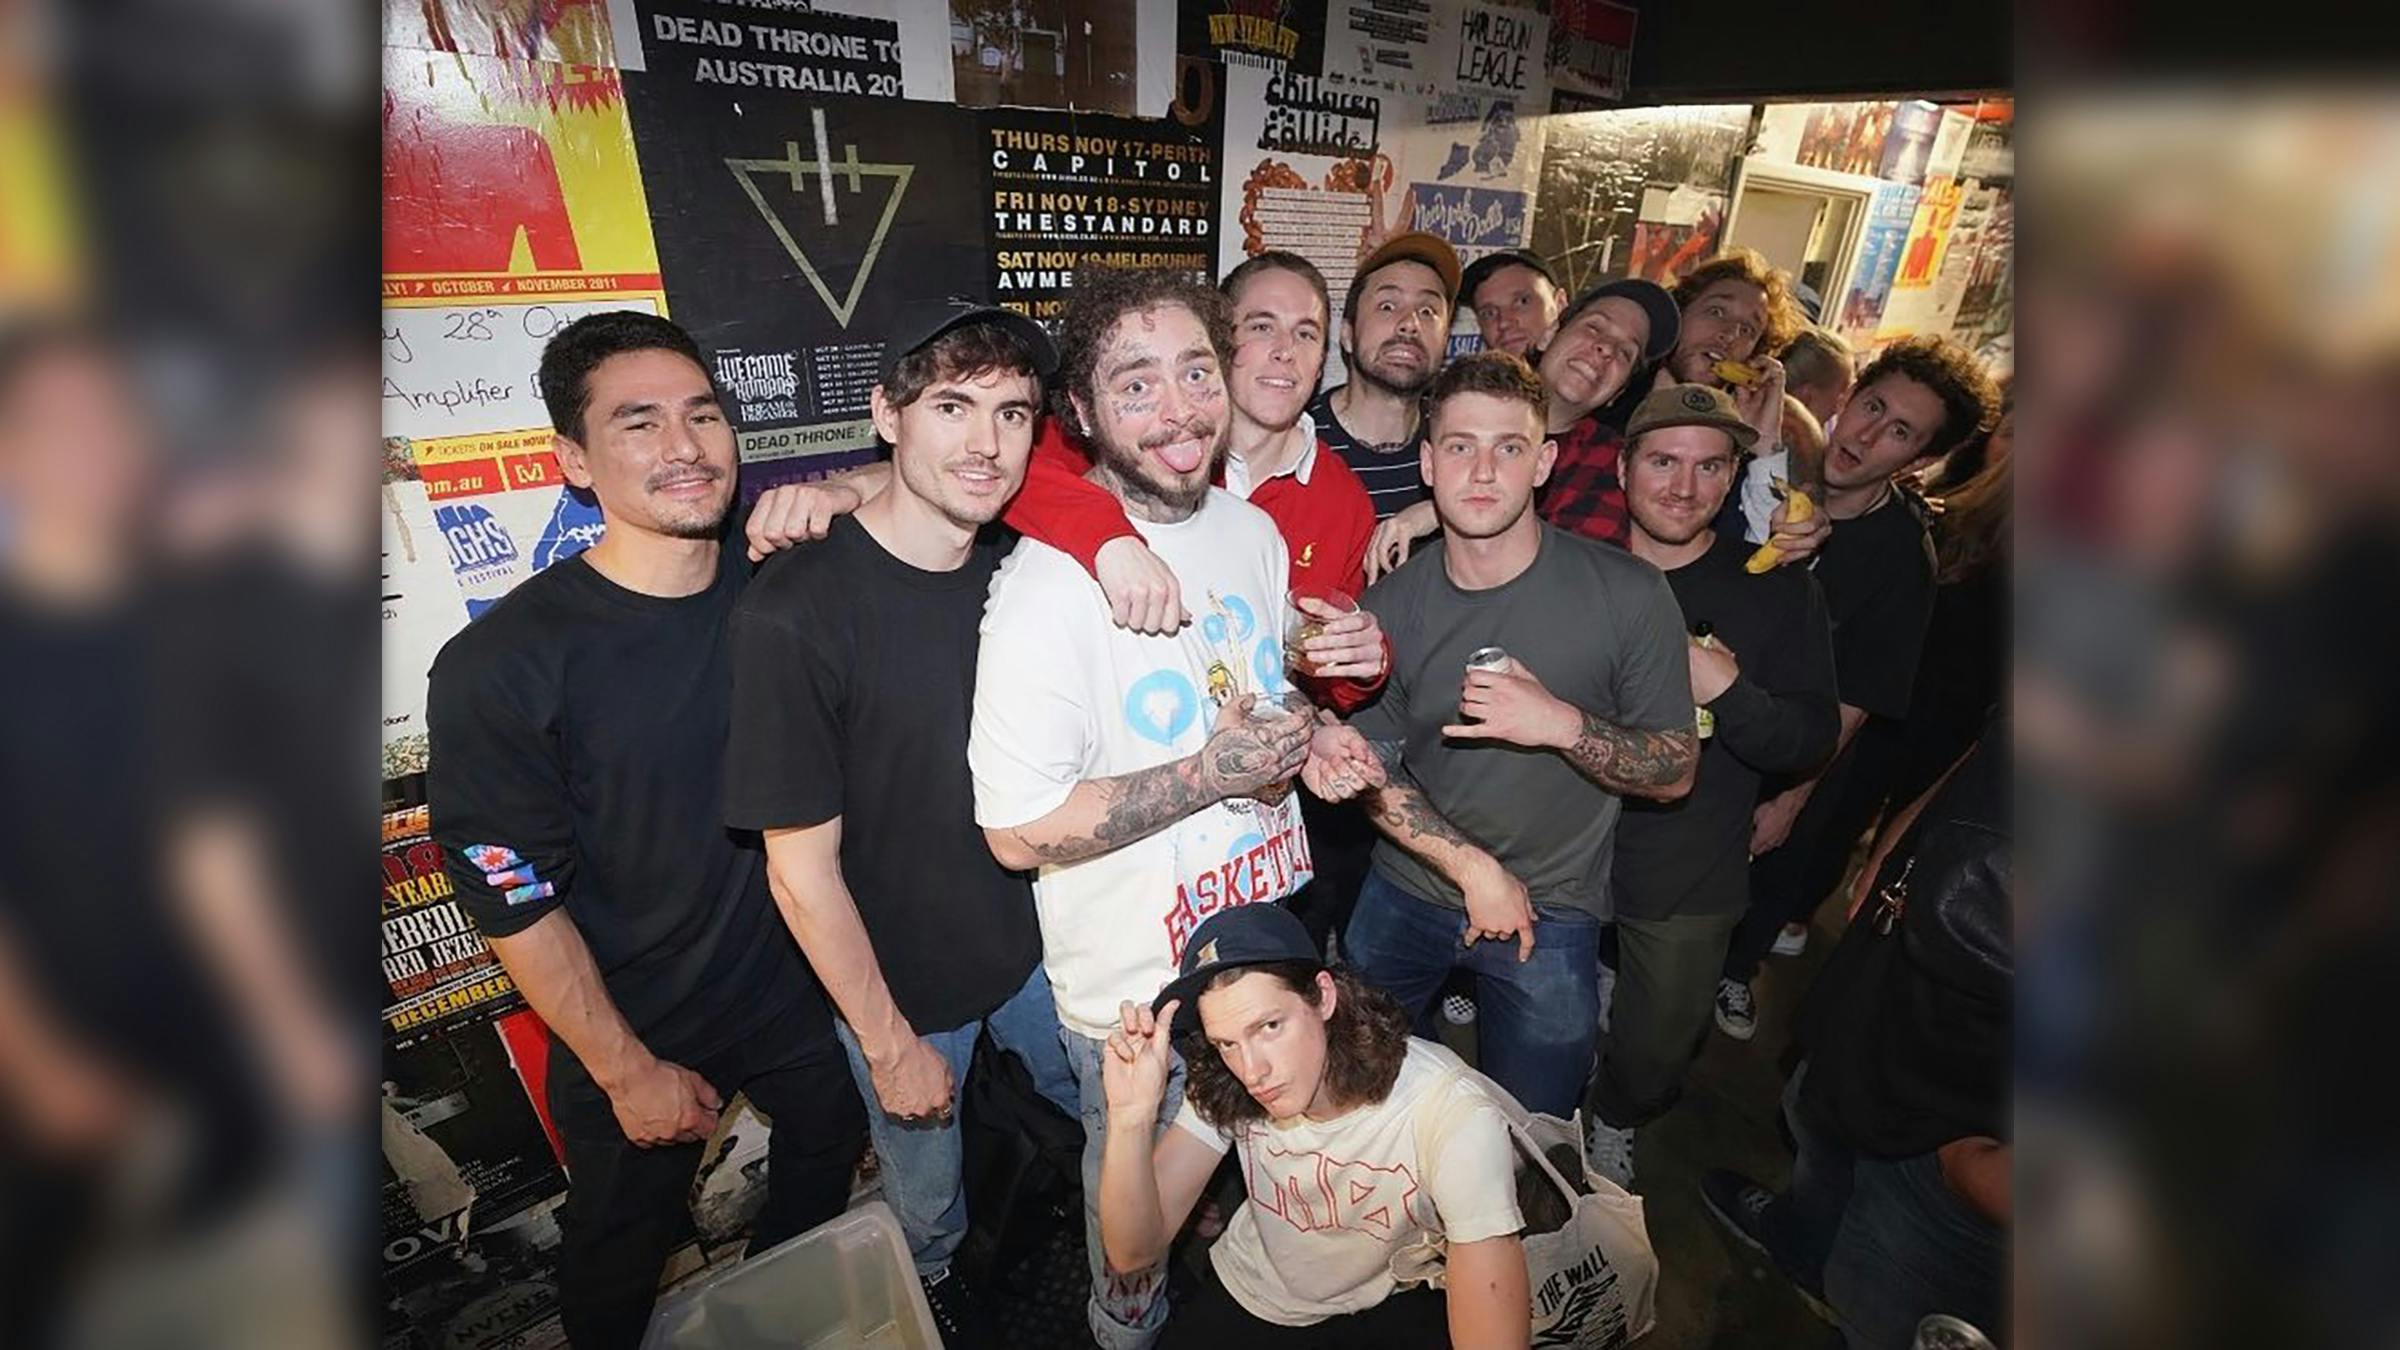 Post Malone Was Spotted at a Basement and The Story So Far Show in Australia